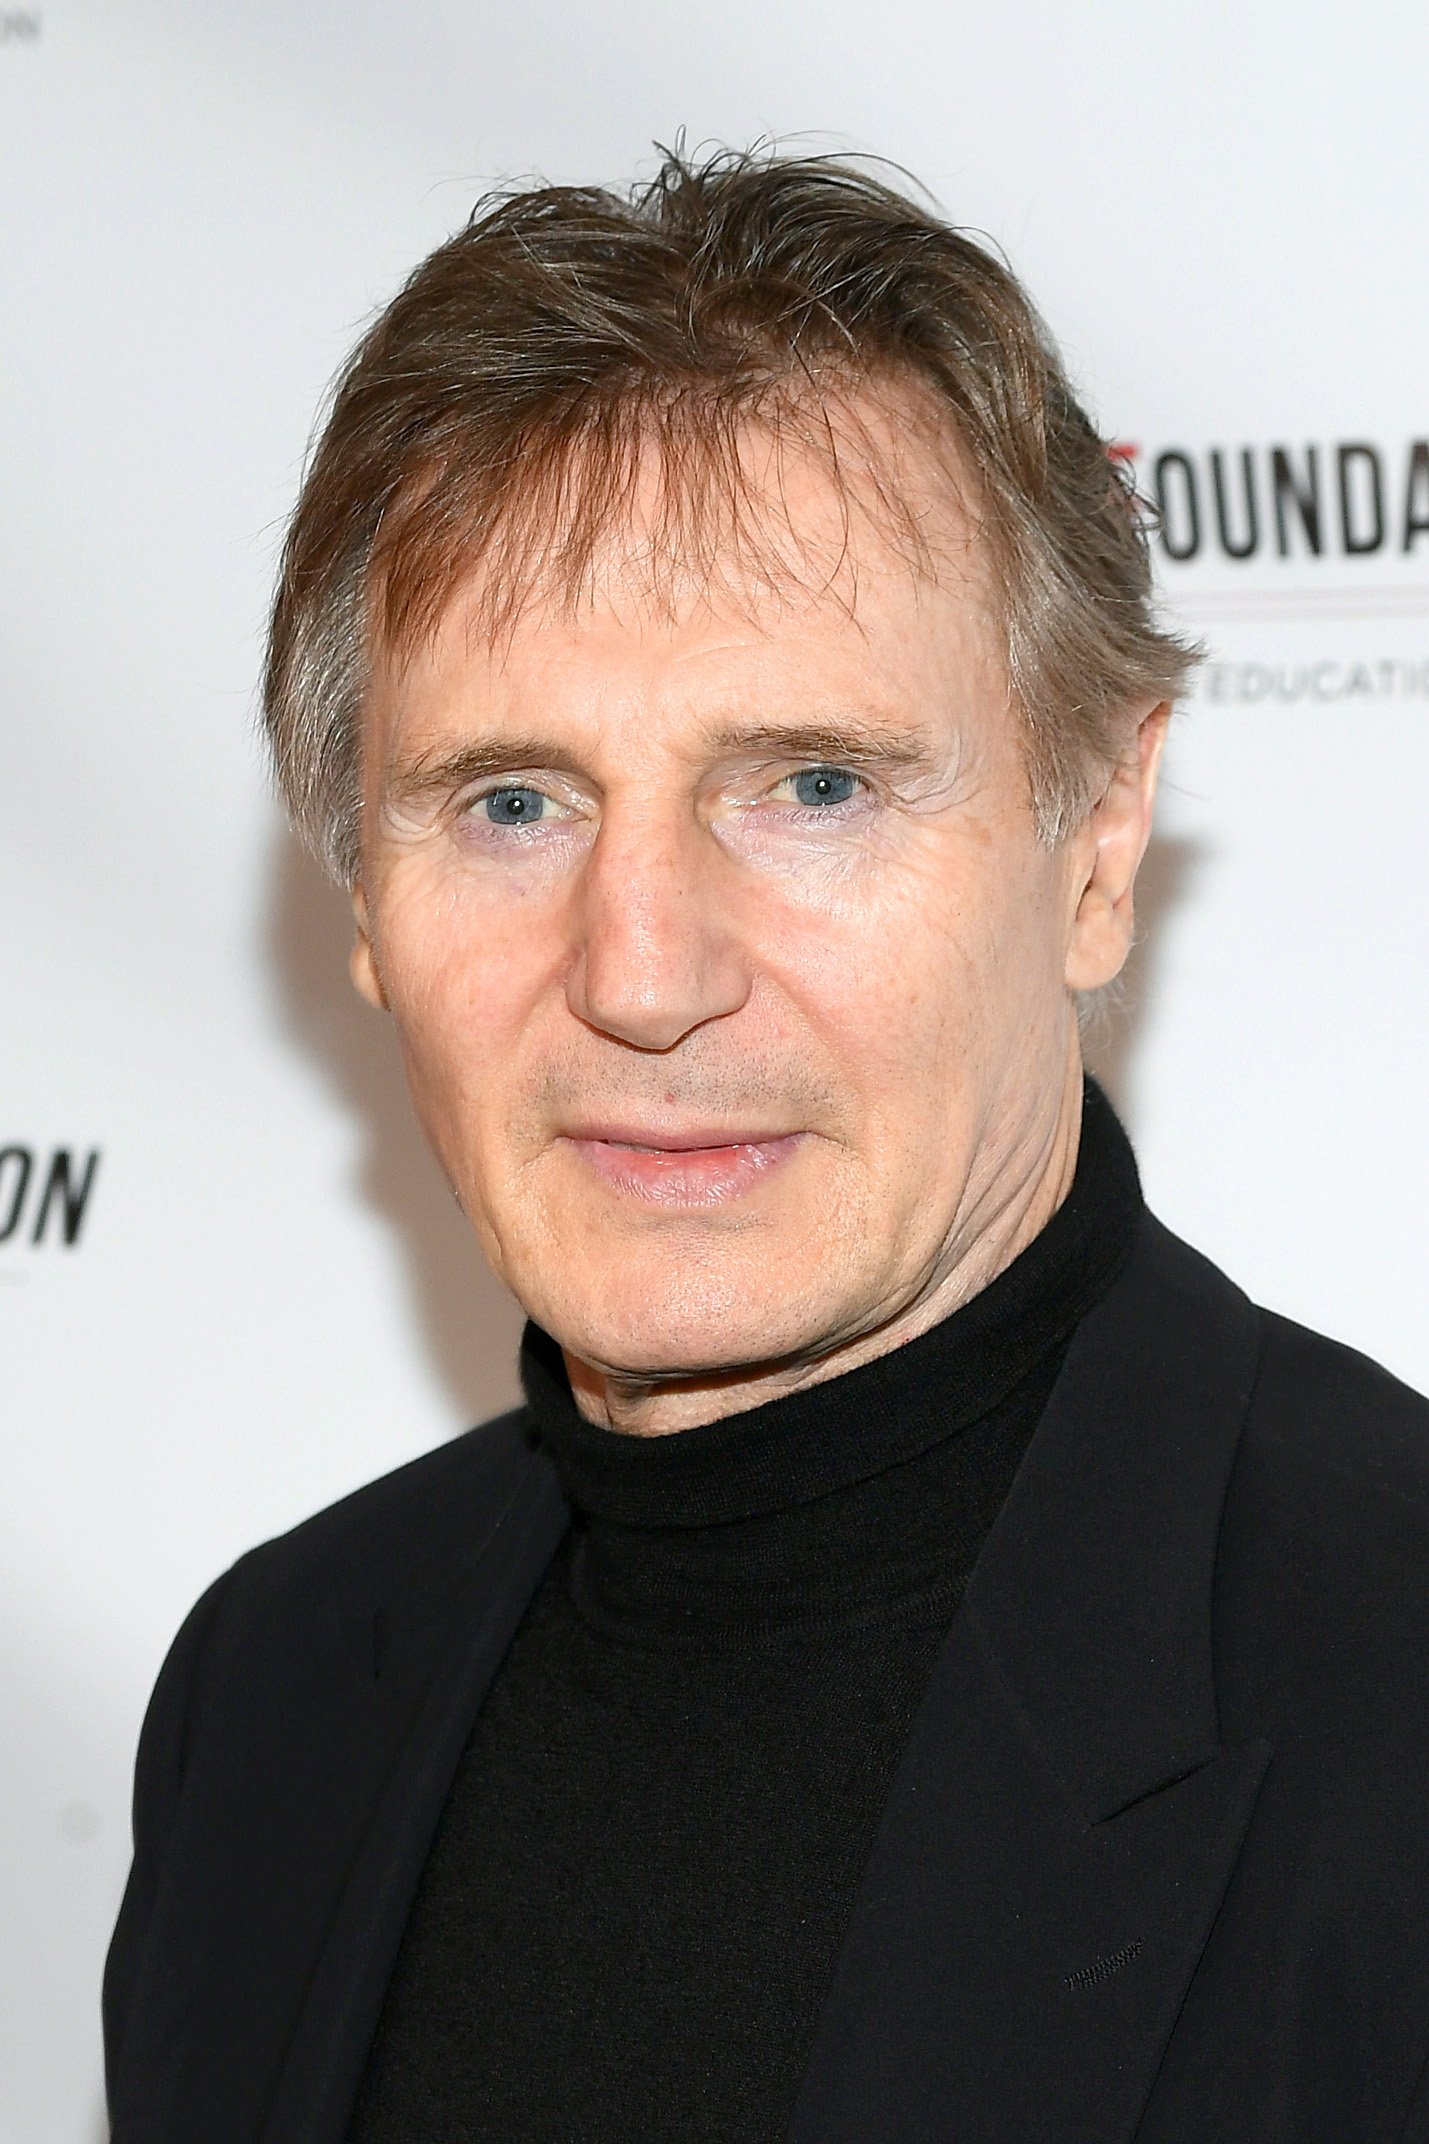 Liam Neeson at the Arthur Miller Foundation Honors in New York City | Photo: Getty Images